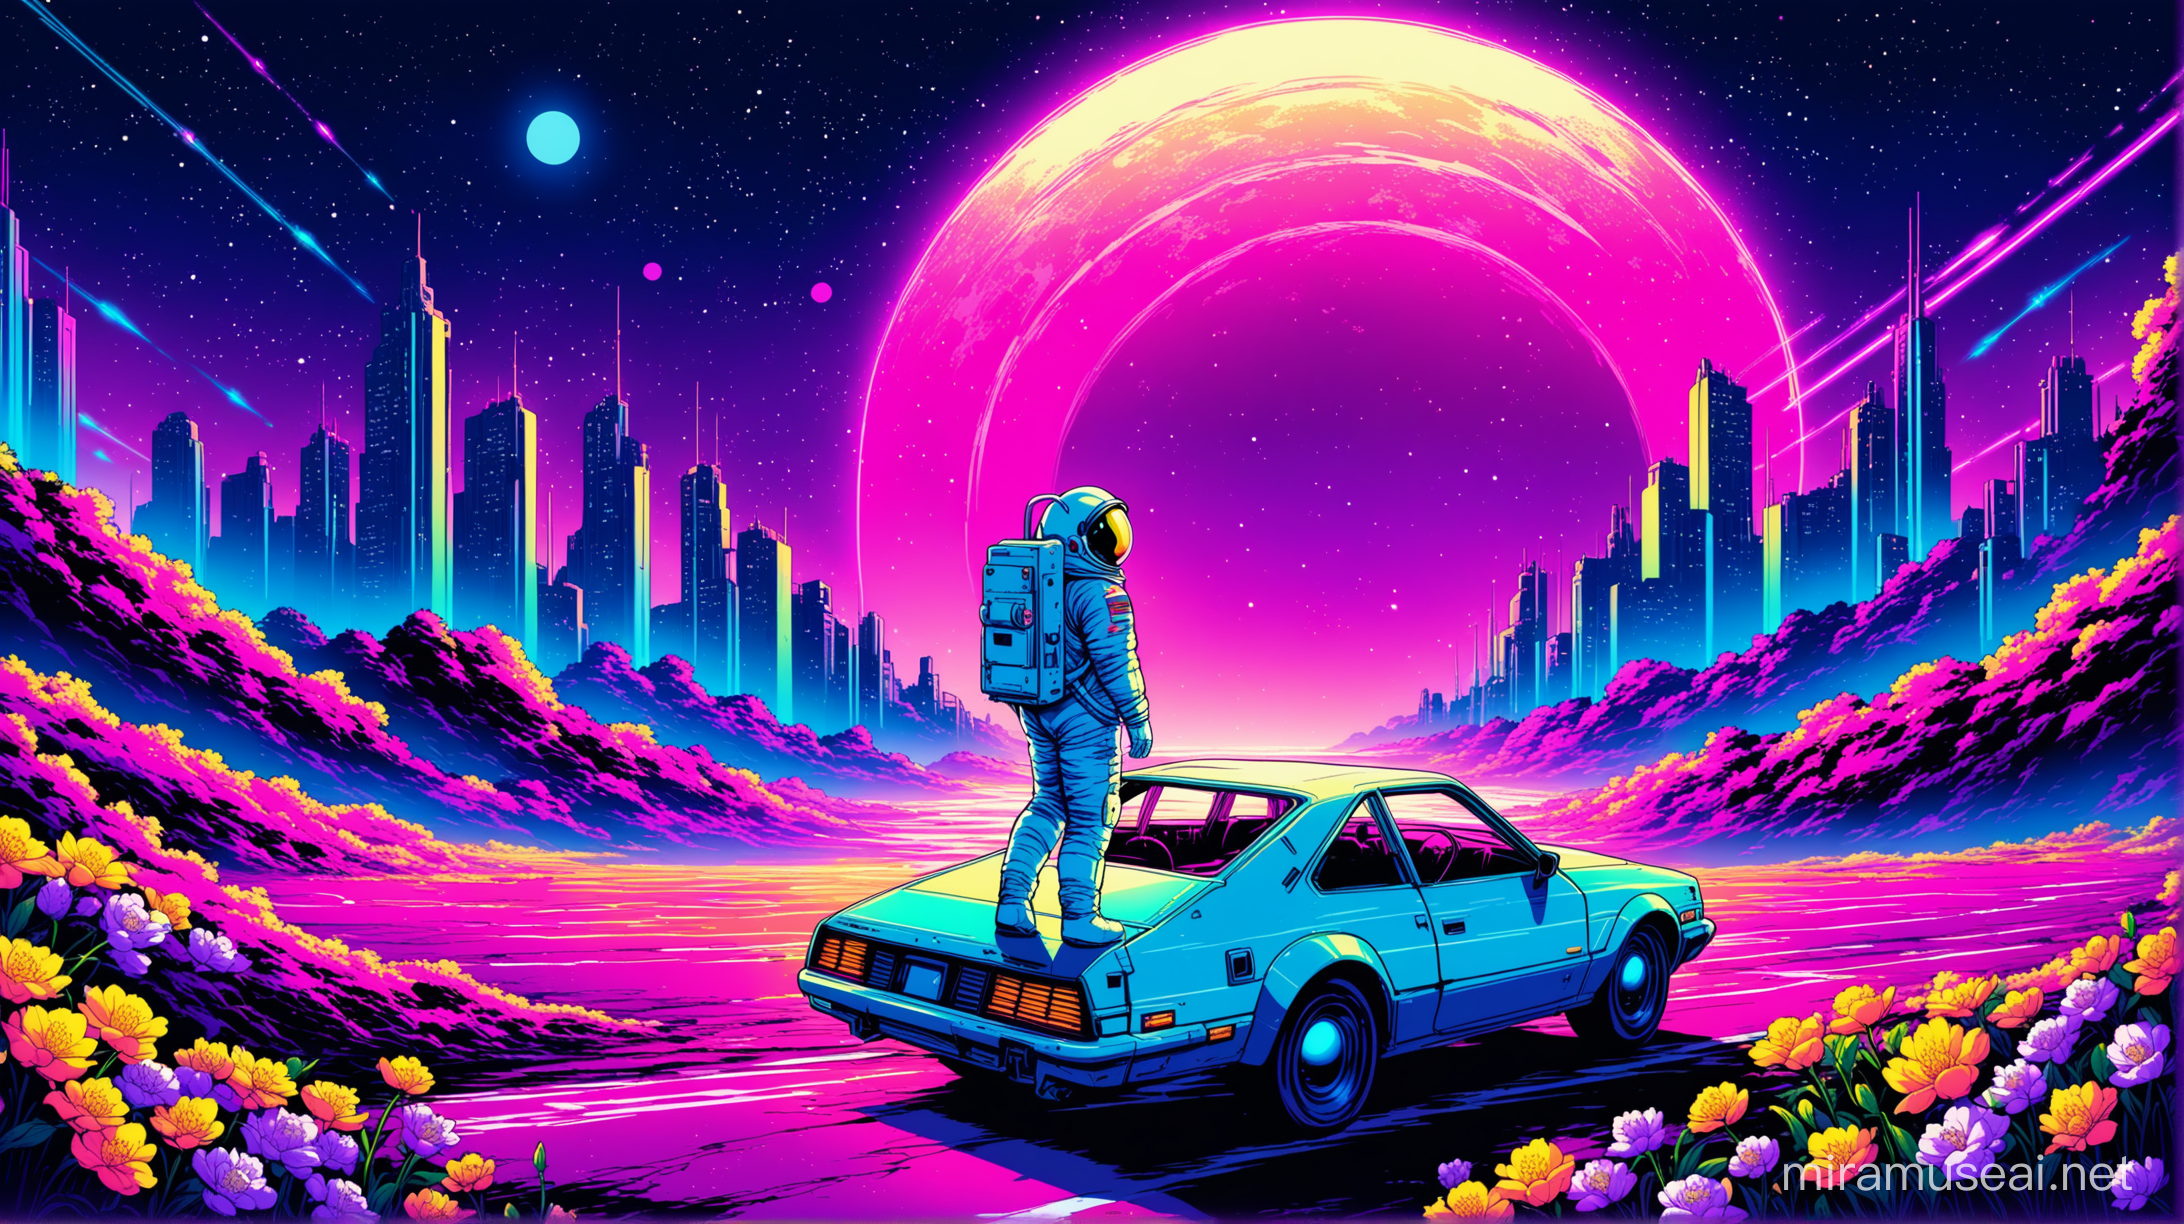 Nostalgic car space drive synthwave
spring flowers
Space suit astronaut
lost abandonned city
dystopia night 
neons
blue color
not too much saturated colors
moonlight
high speed
